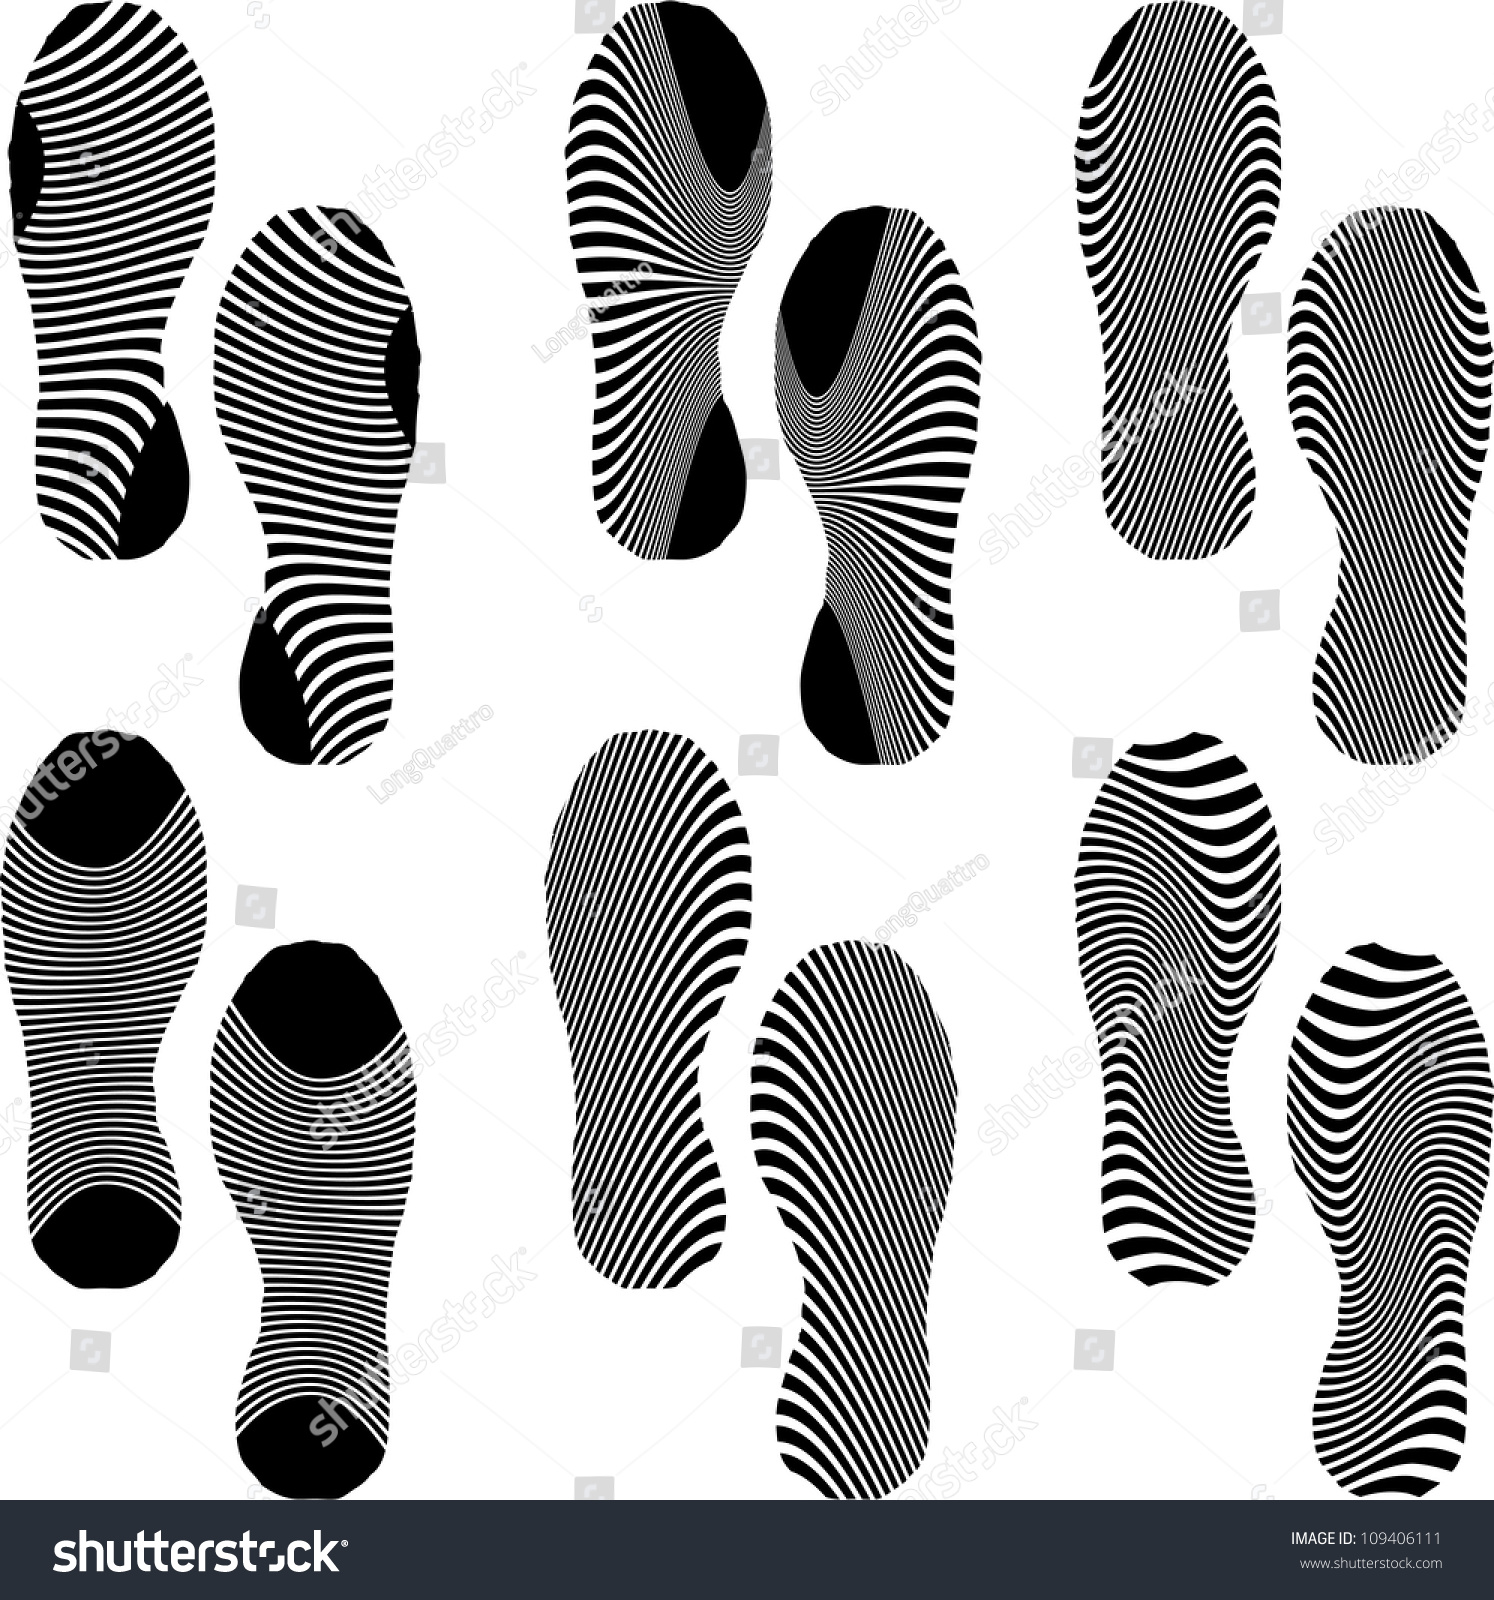 Set Of Six Black Footprint With Lines Stock Vector Illustration ...